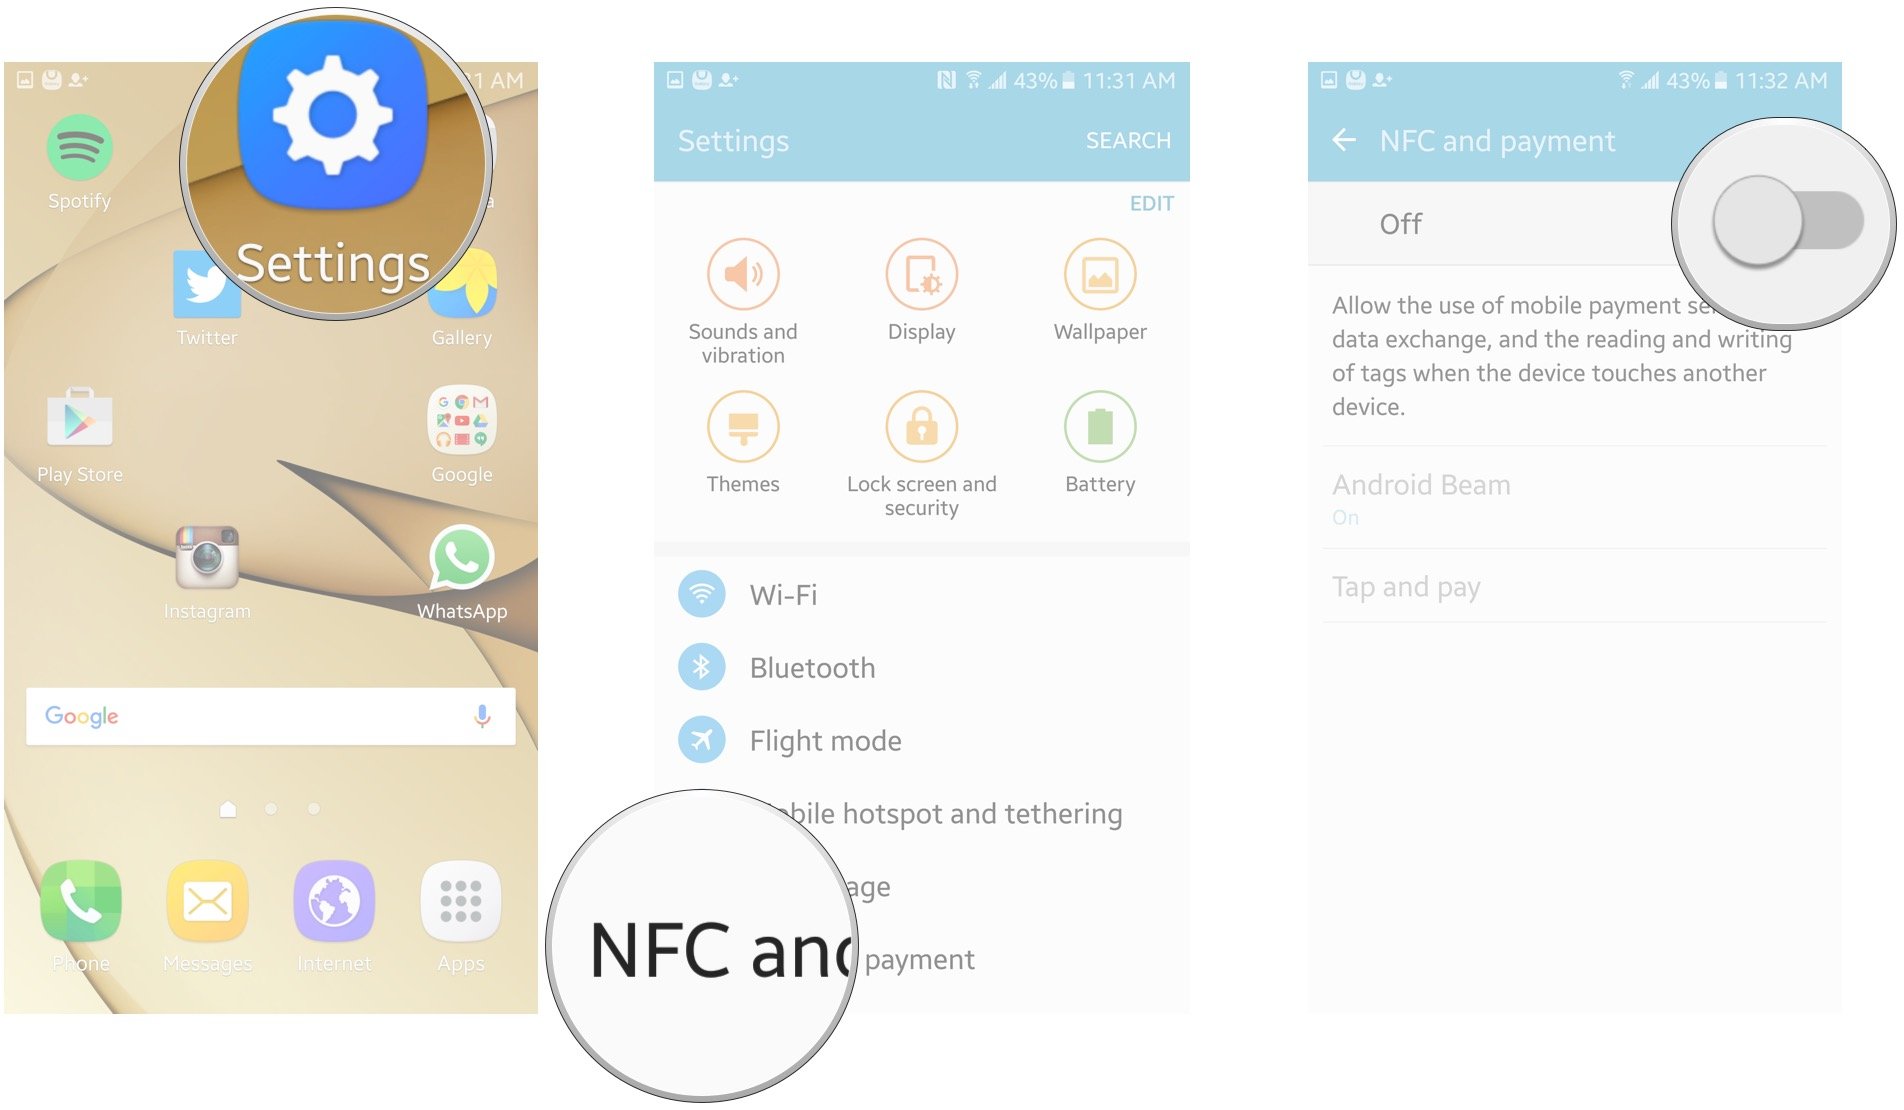 Tap NFC and pay, tap Tap and pay, choose a default